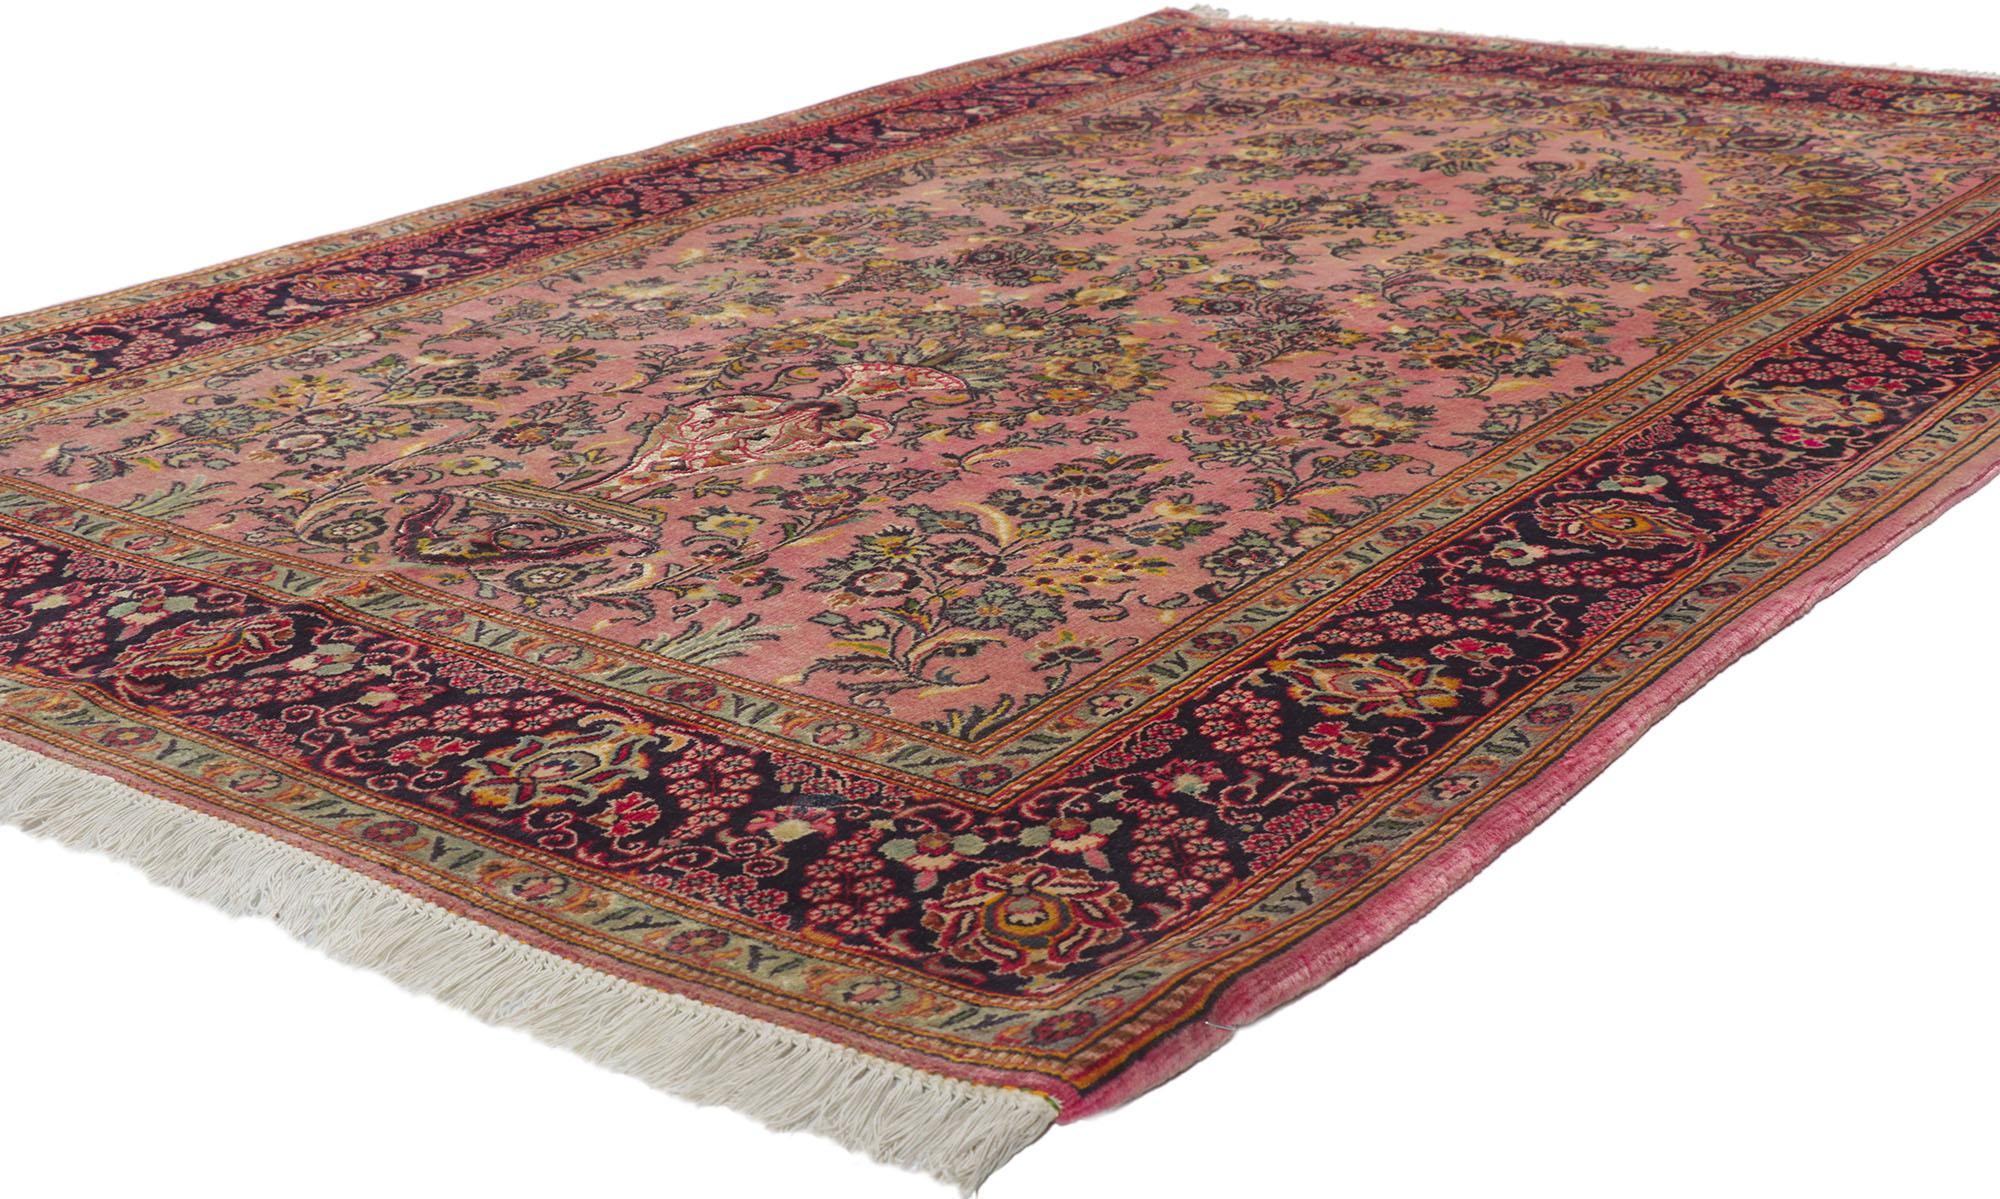 61027 Vintage Persian Kashan rug with vase design 04'10 x 07'04. With timeless floral design and effortless beauty, this hand knotted wool and silk vintage Persian Kashan rug is a captivating vision of woven beauty. The abrashed pink colored field